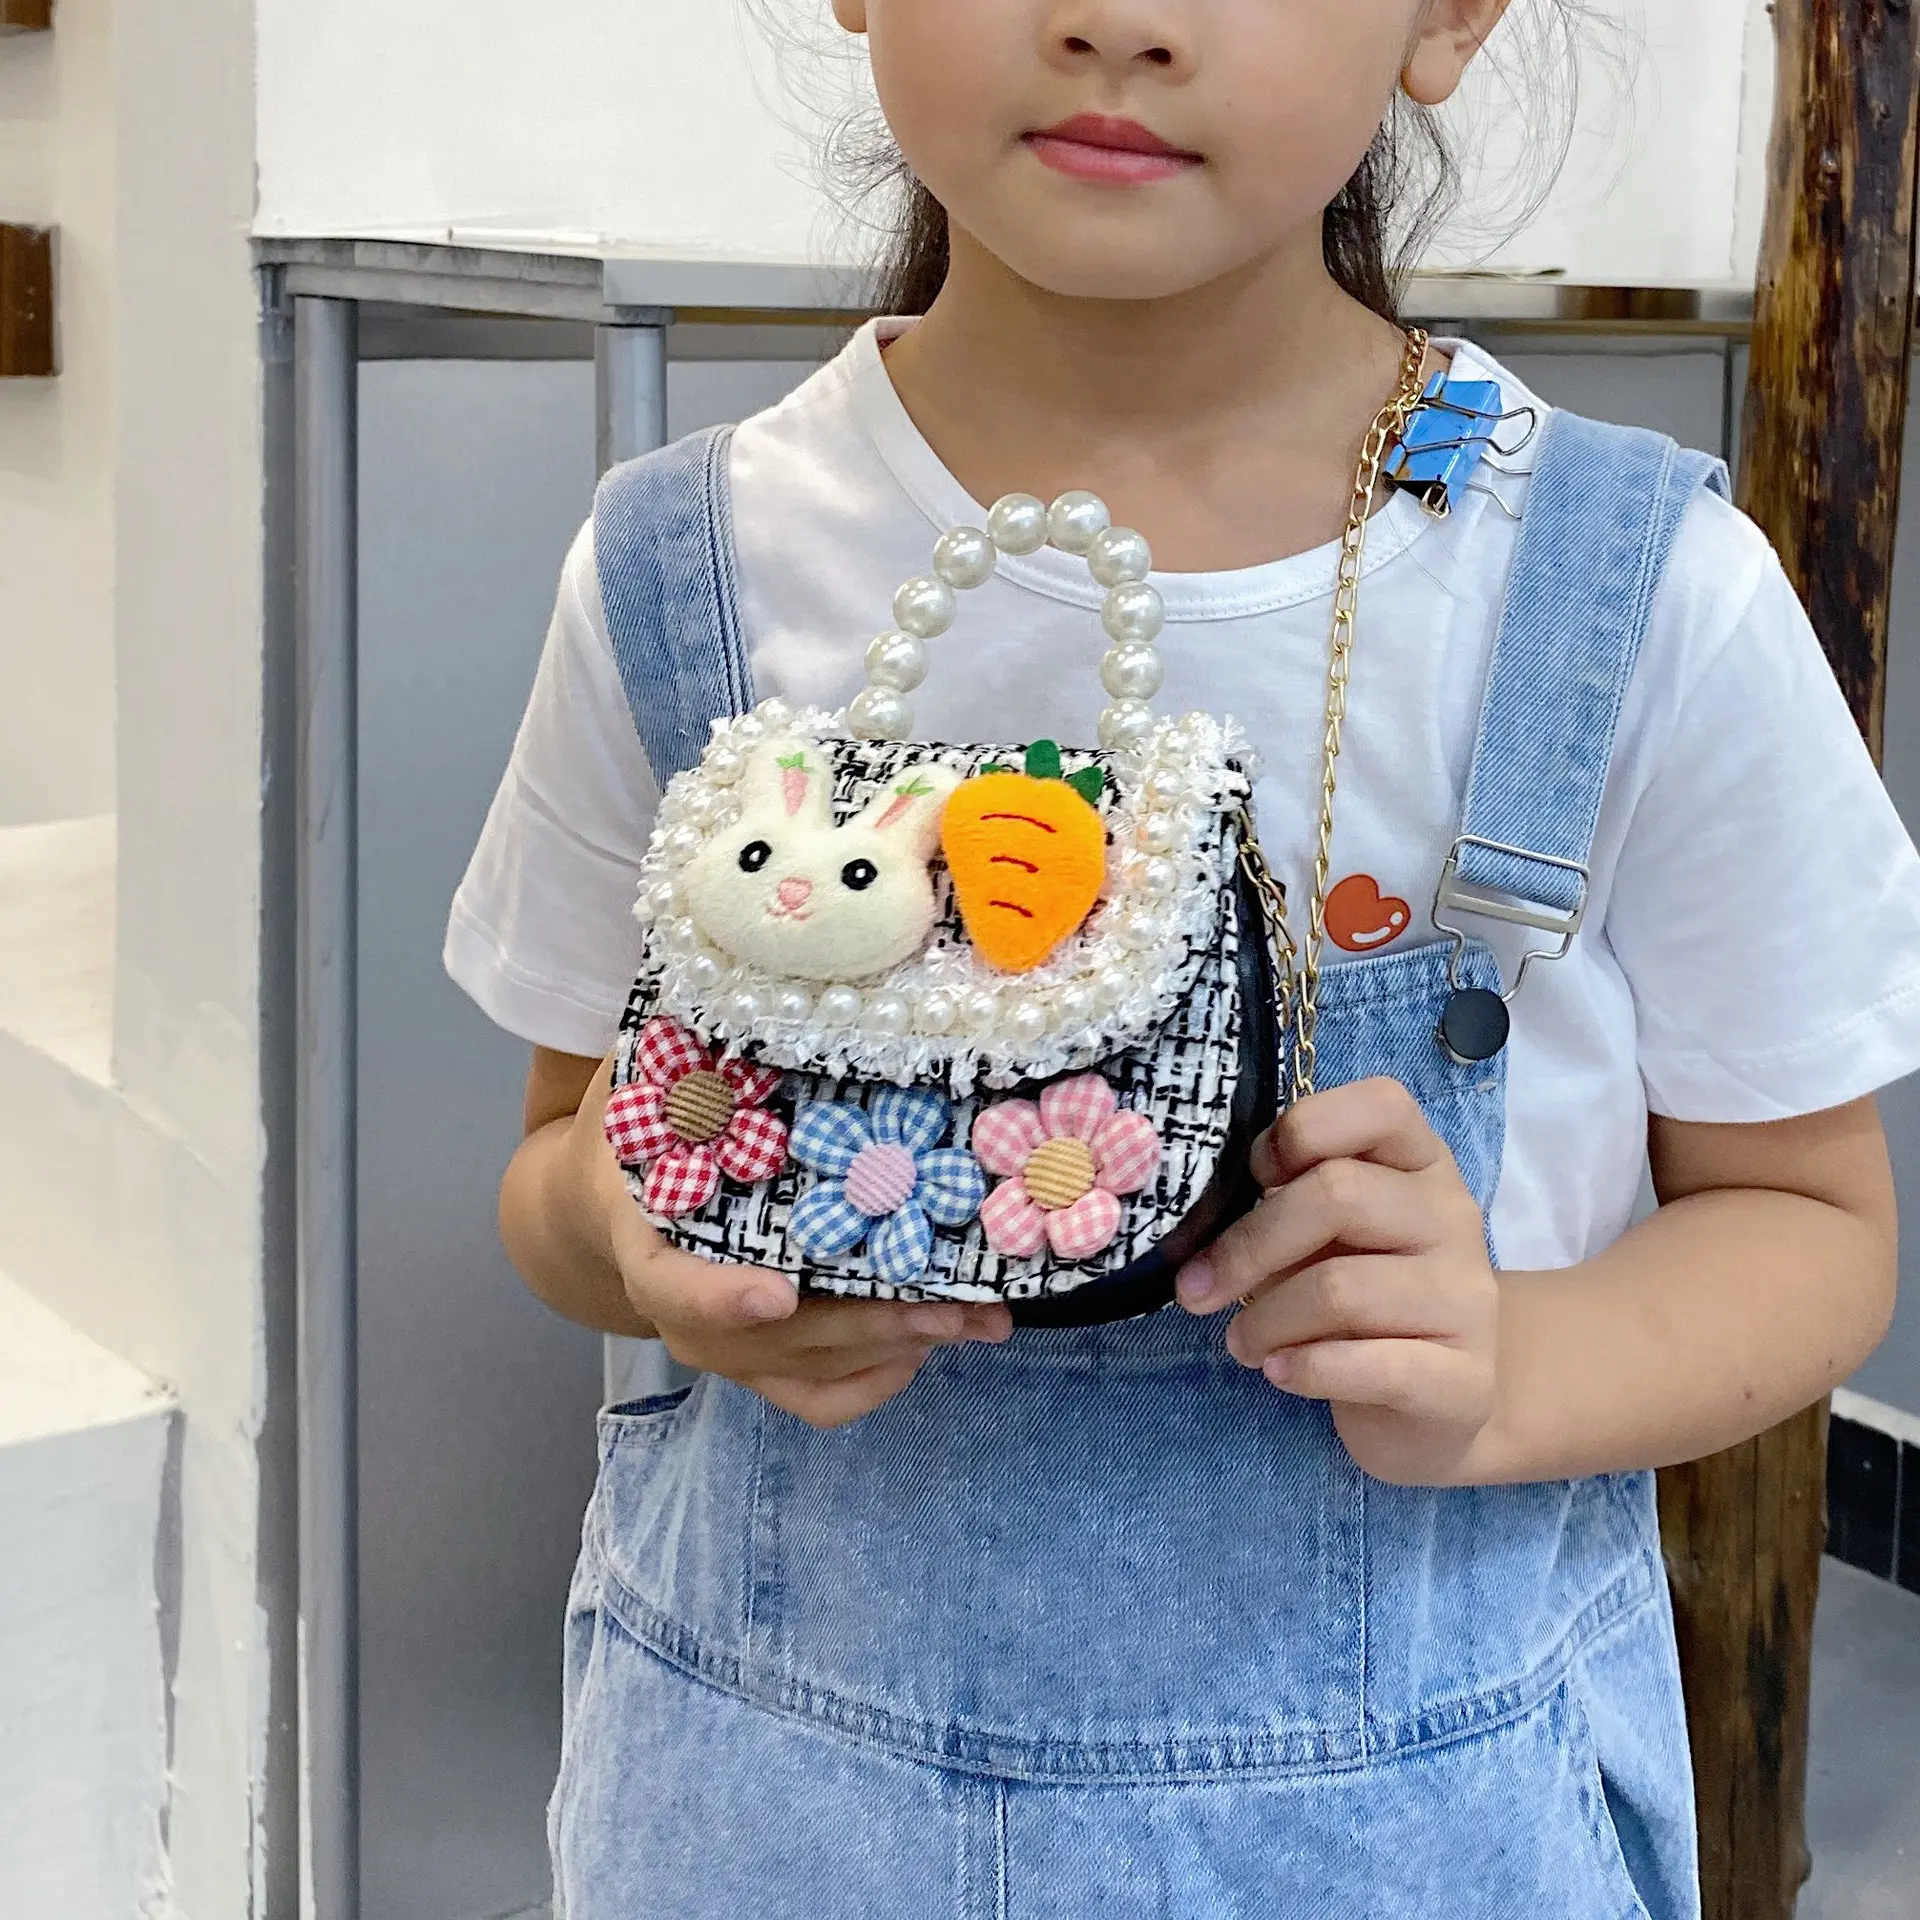 Plush Avocado Bags-Kids Girls Toddlers Lovely Hairy Mini Shoulder Bags Messenger Bags Cell Phone Case Holder Small Purse Clutch Cross Body Handbags